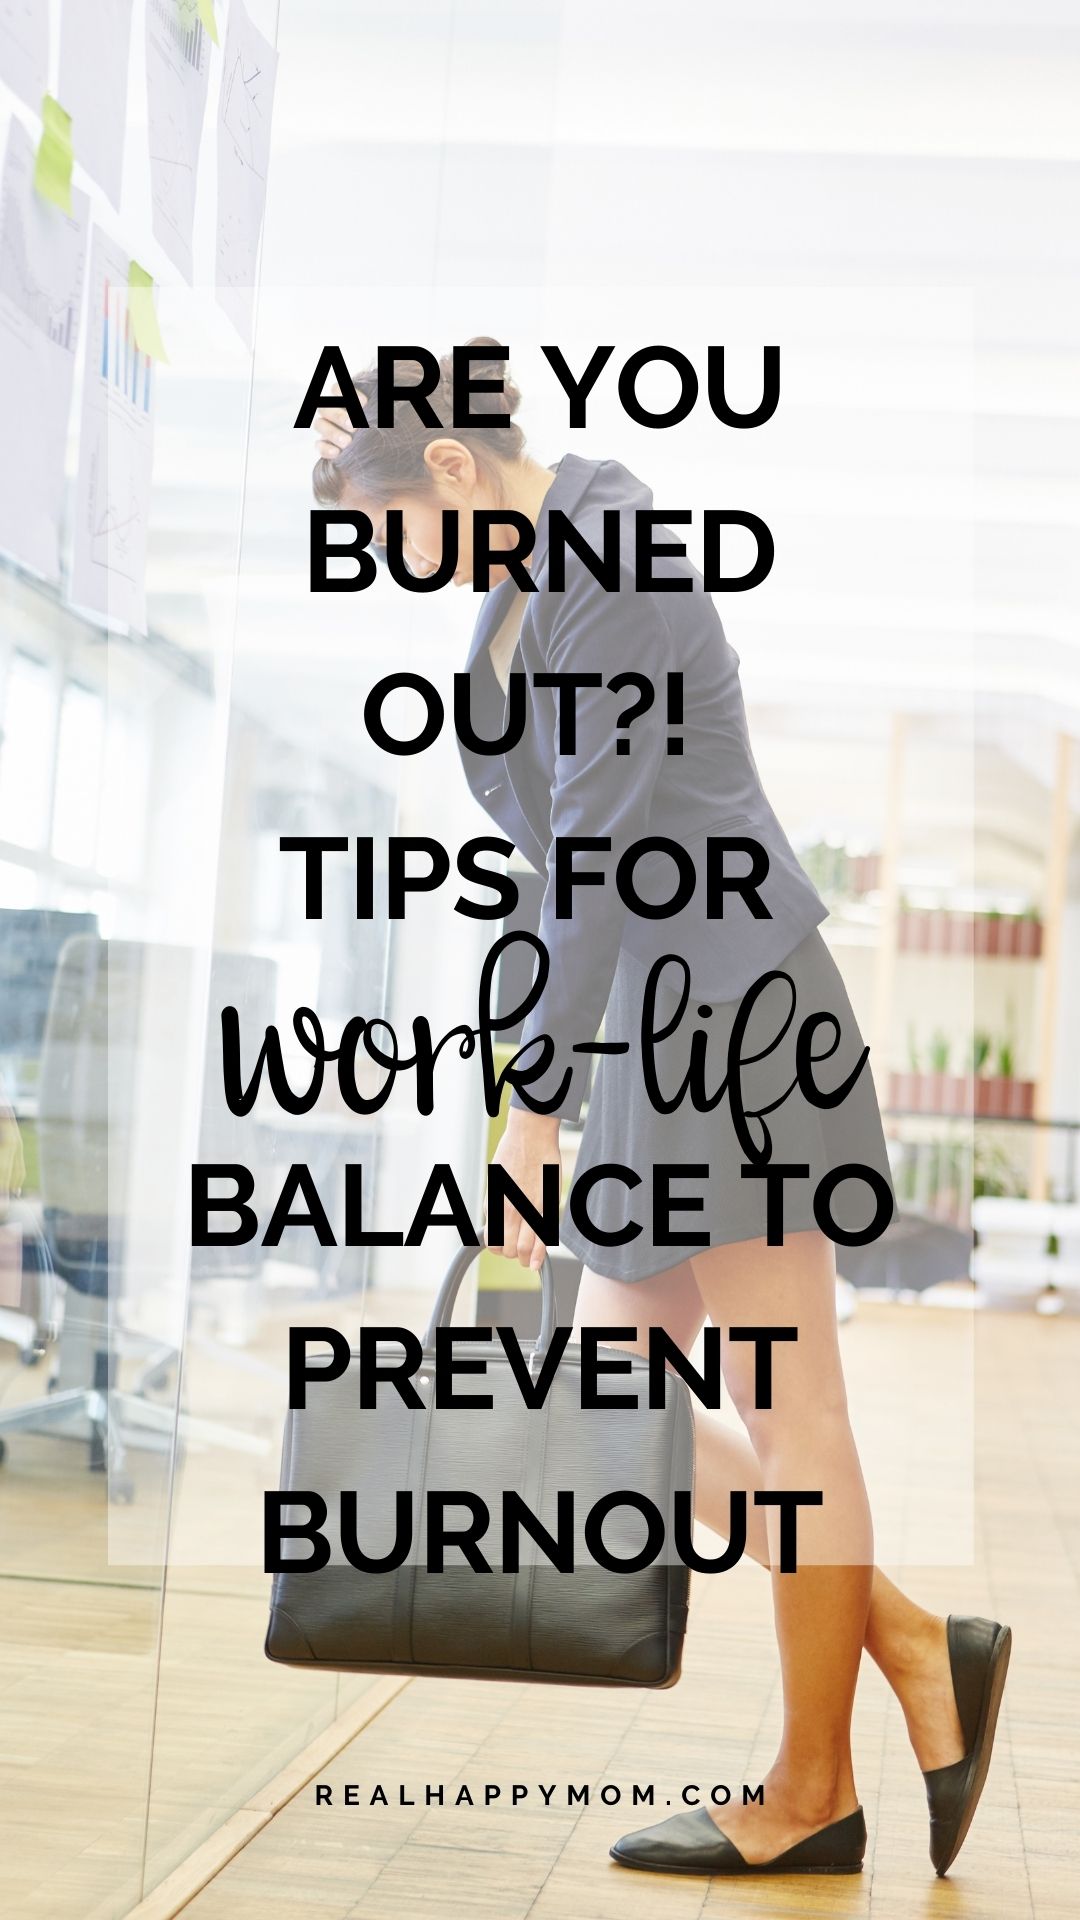 Are You Burned Out?! Tips for Work-Life Balance to Prevent Burnout